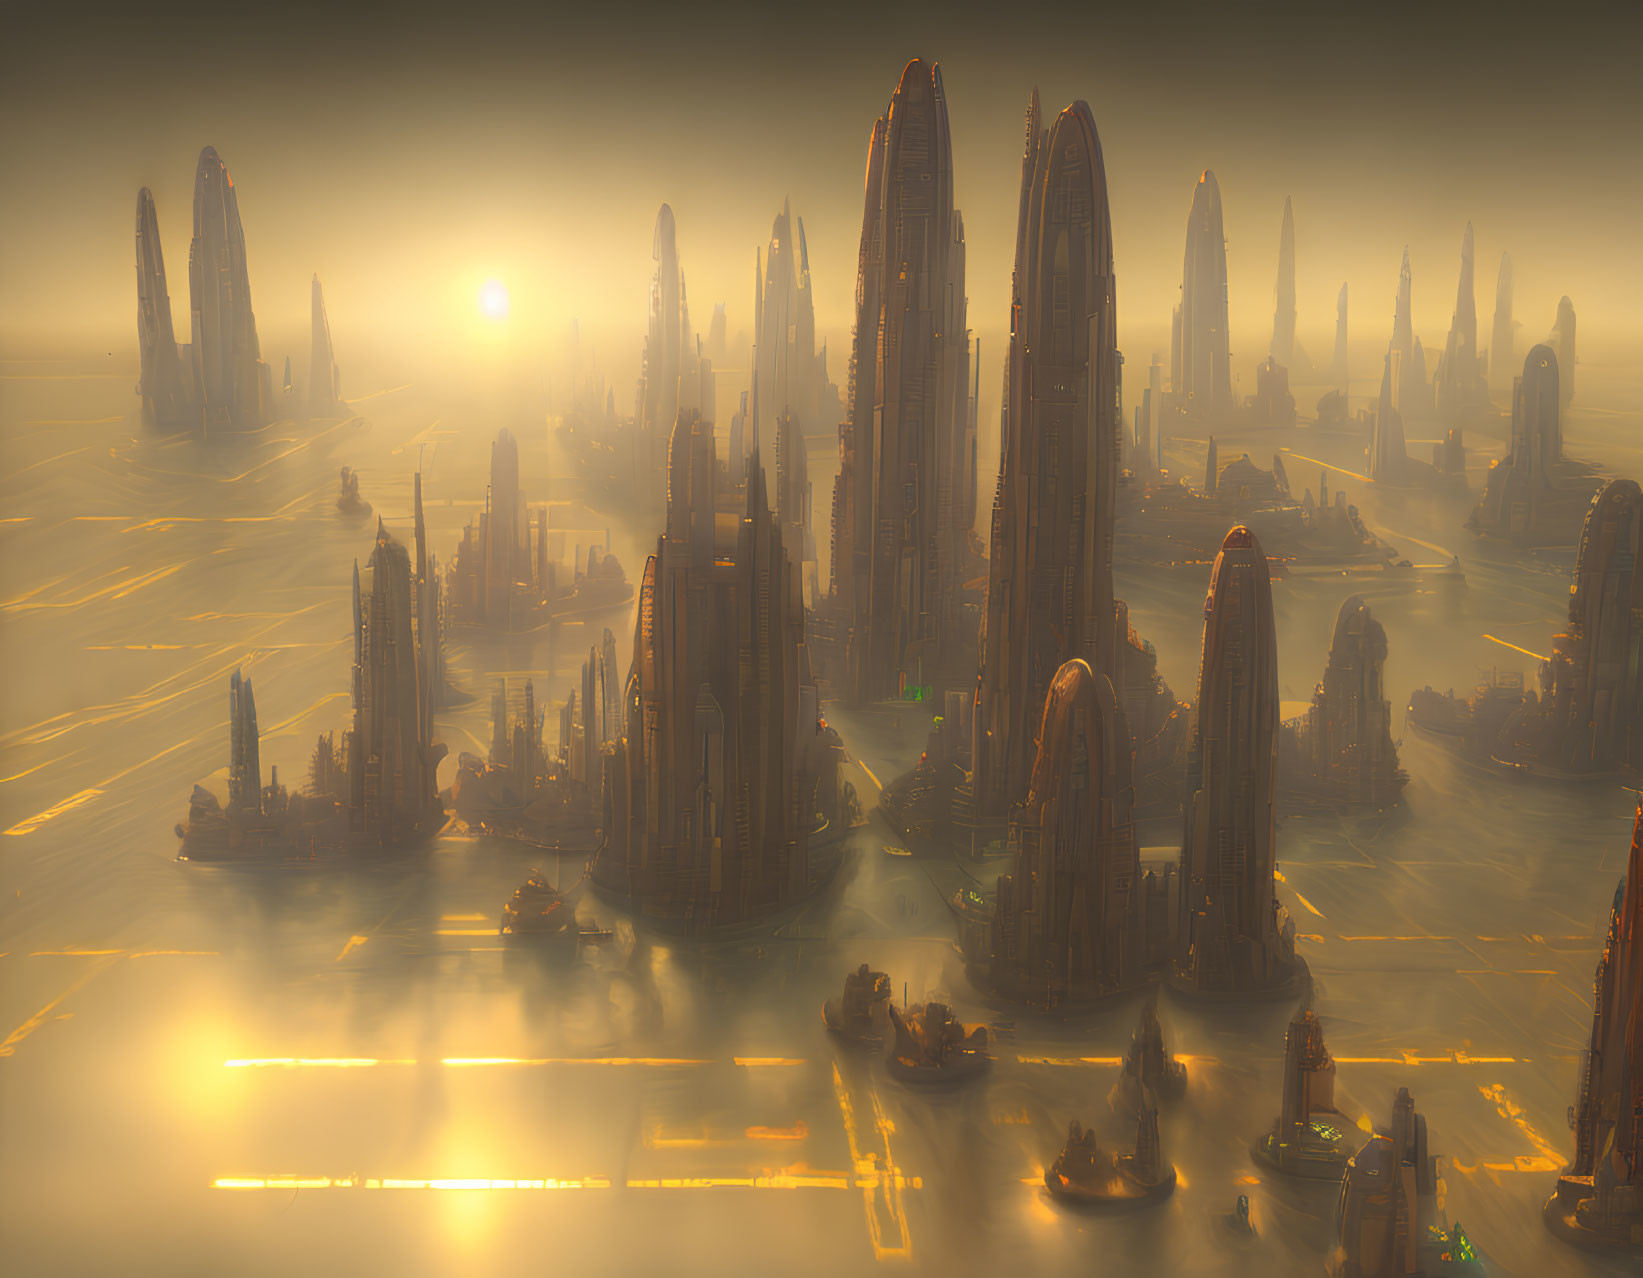 Futuristic sunset cityscape with towering skyscrapers and misty ambiance